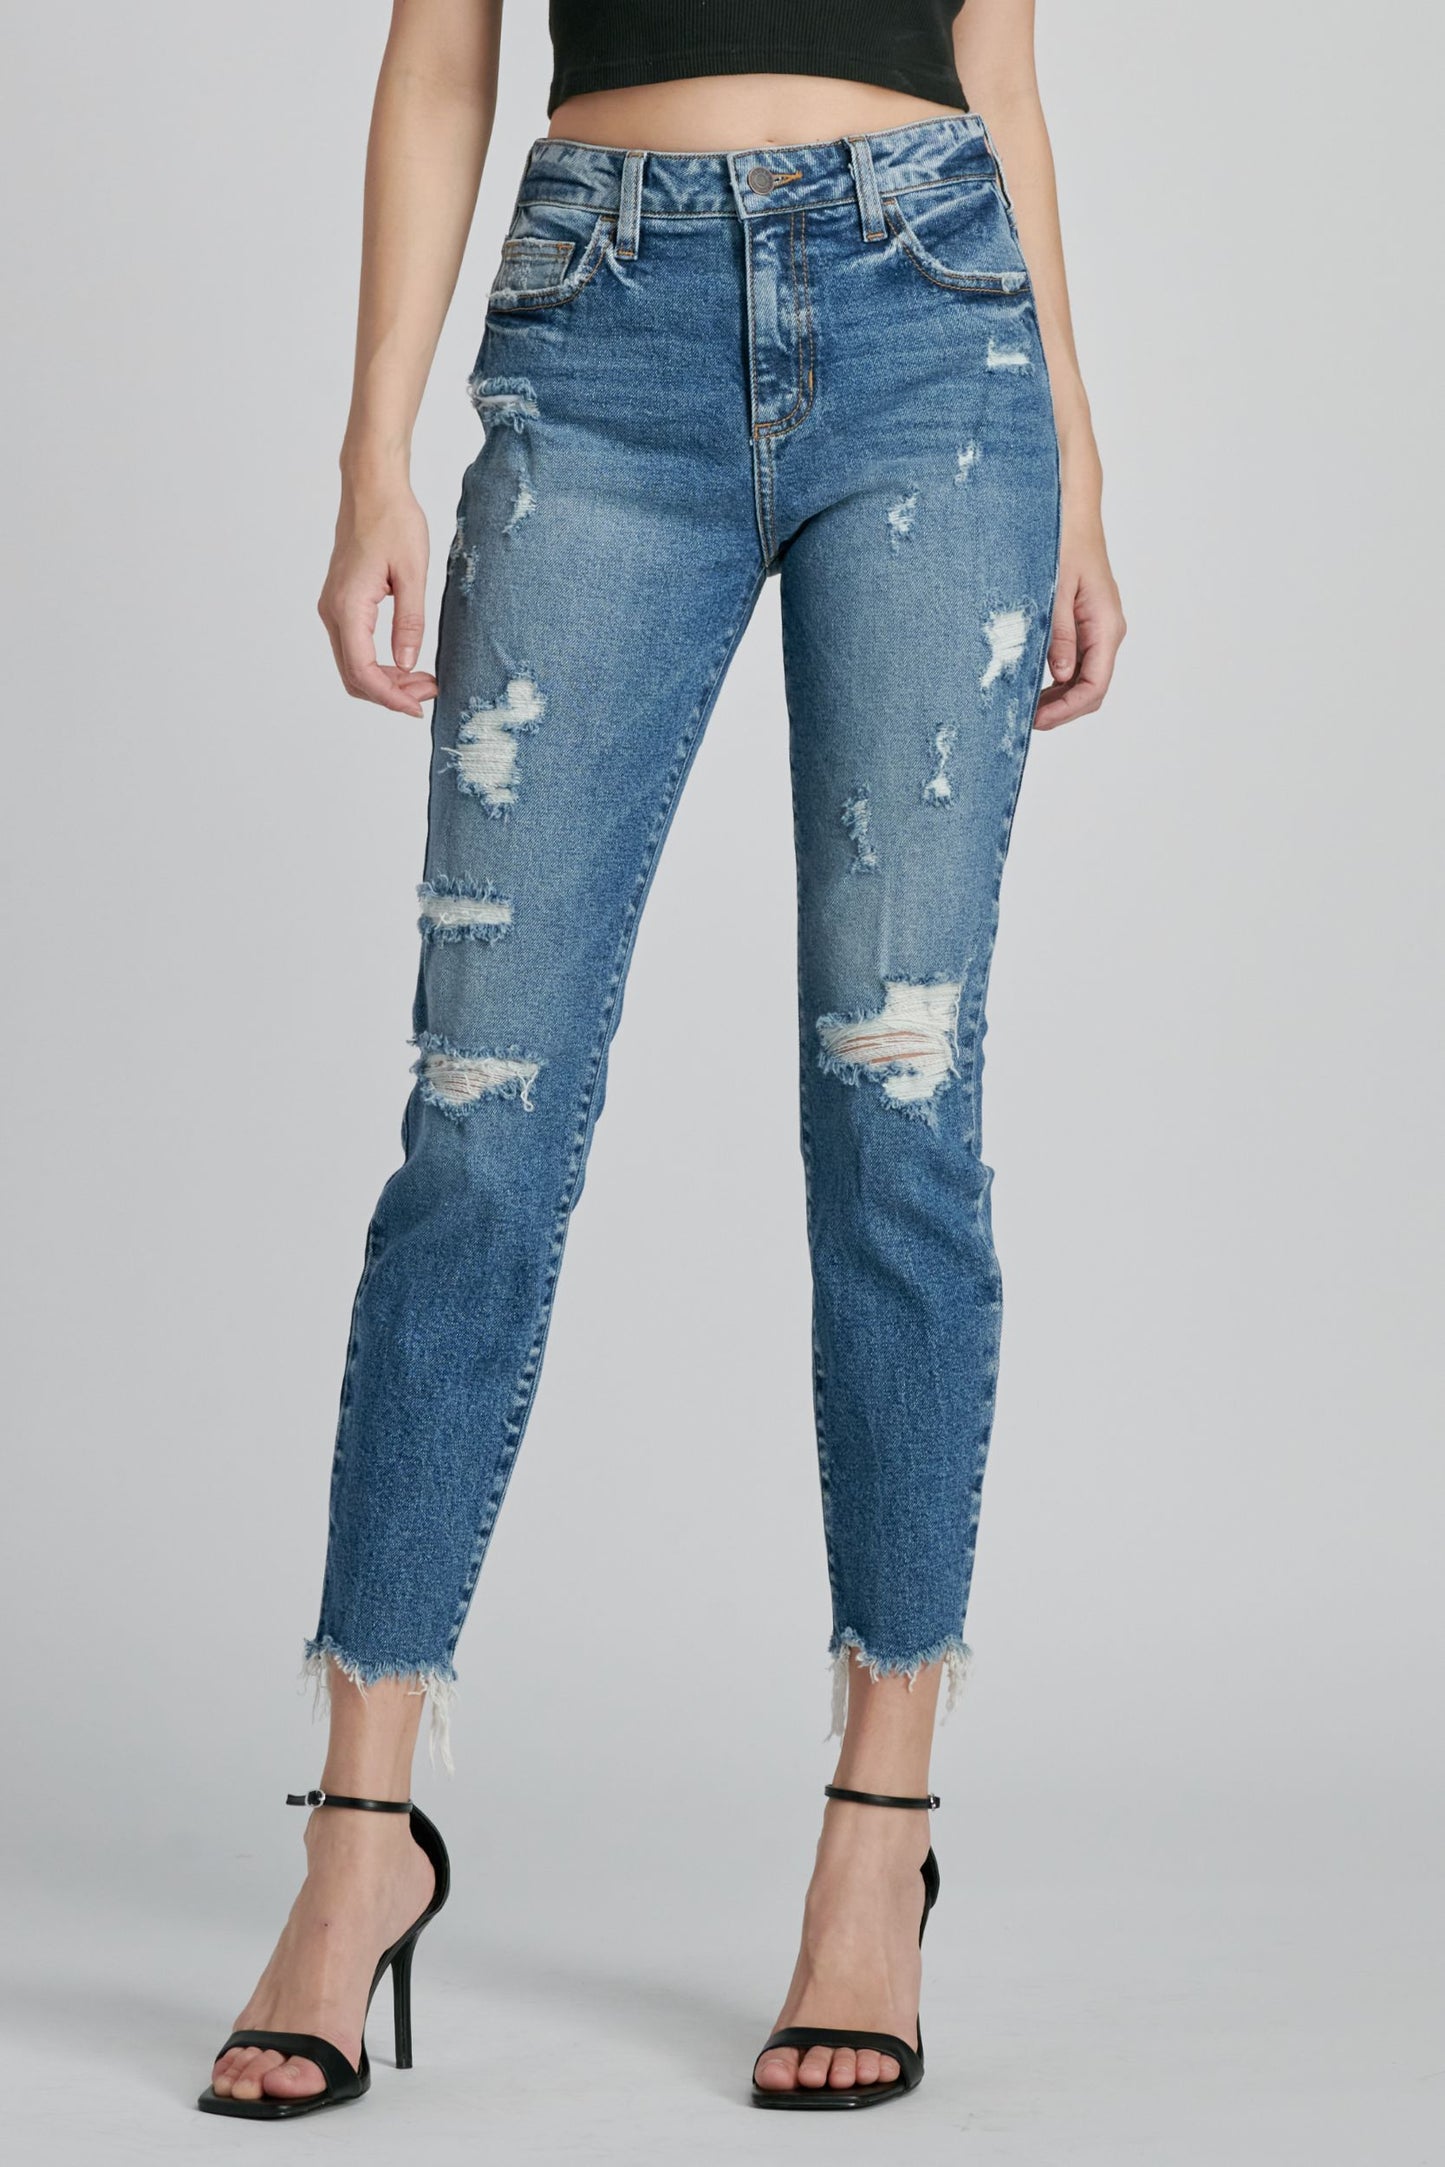 Cello Madison High Rise Mom Skinny Jean - Weeping Willow Boutique